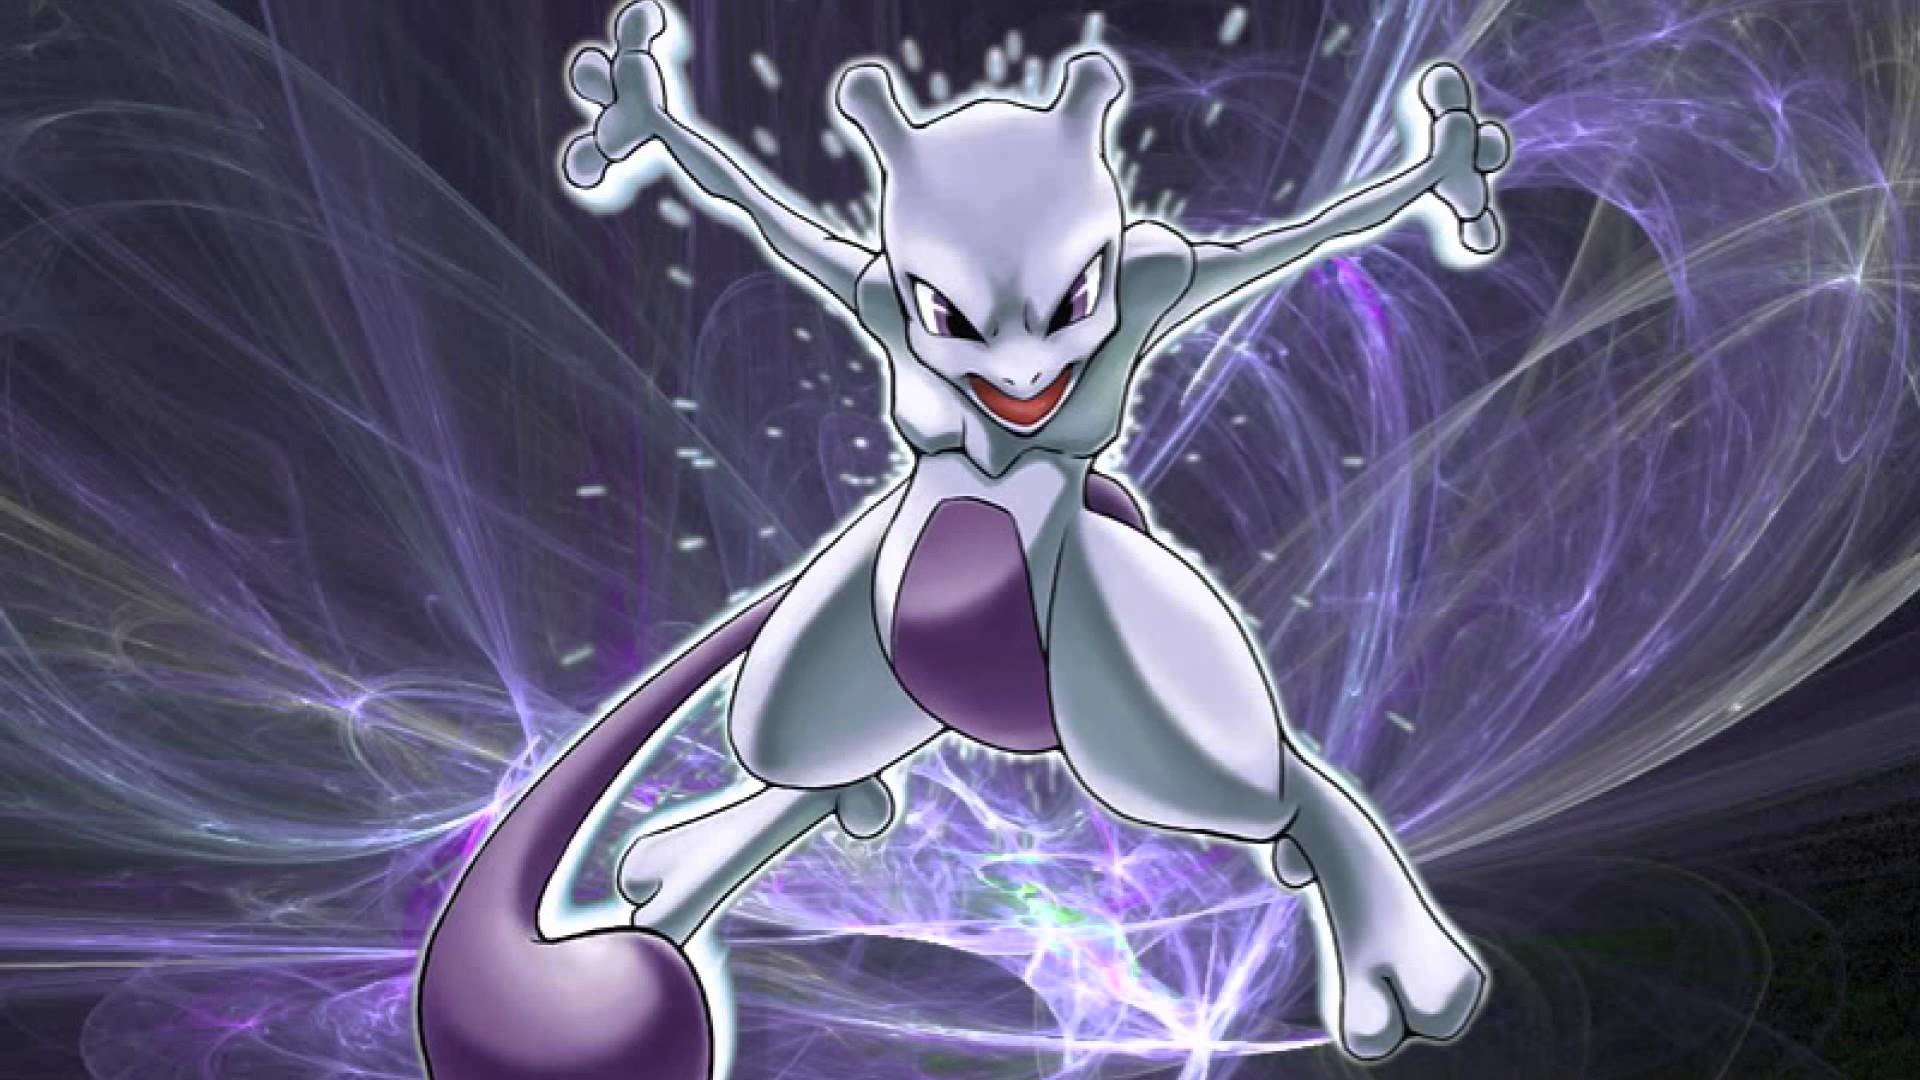 1920x1080 Cool mewtwo wallpaper Geeks united Pinterest PokÃ©mon and